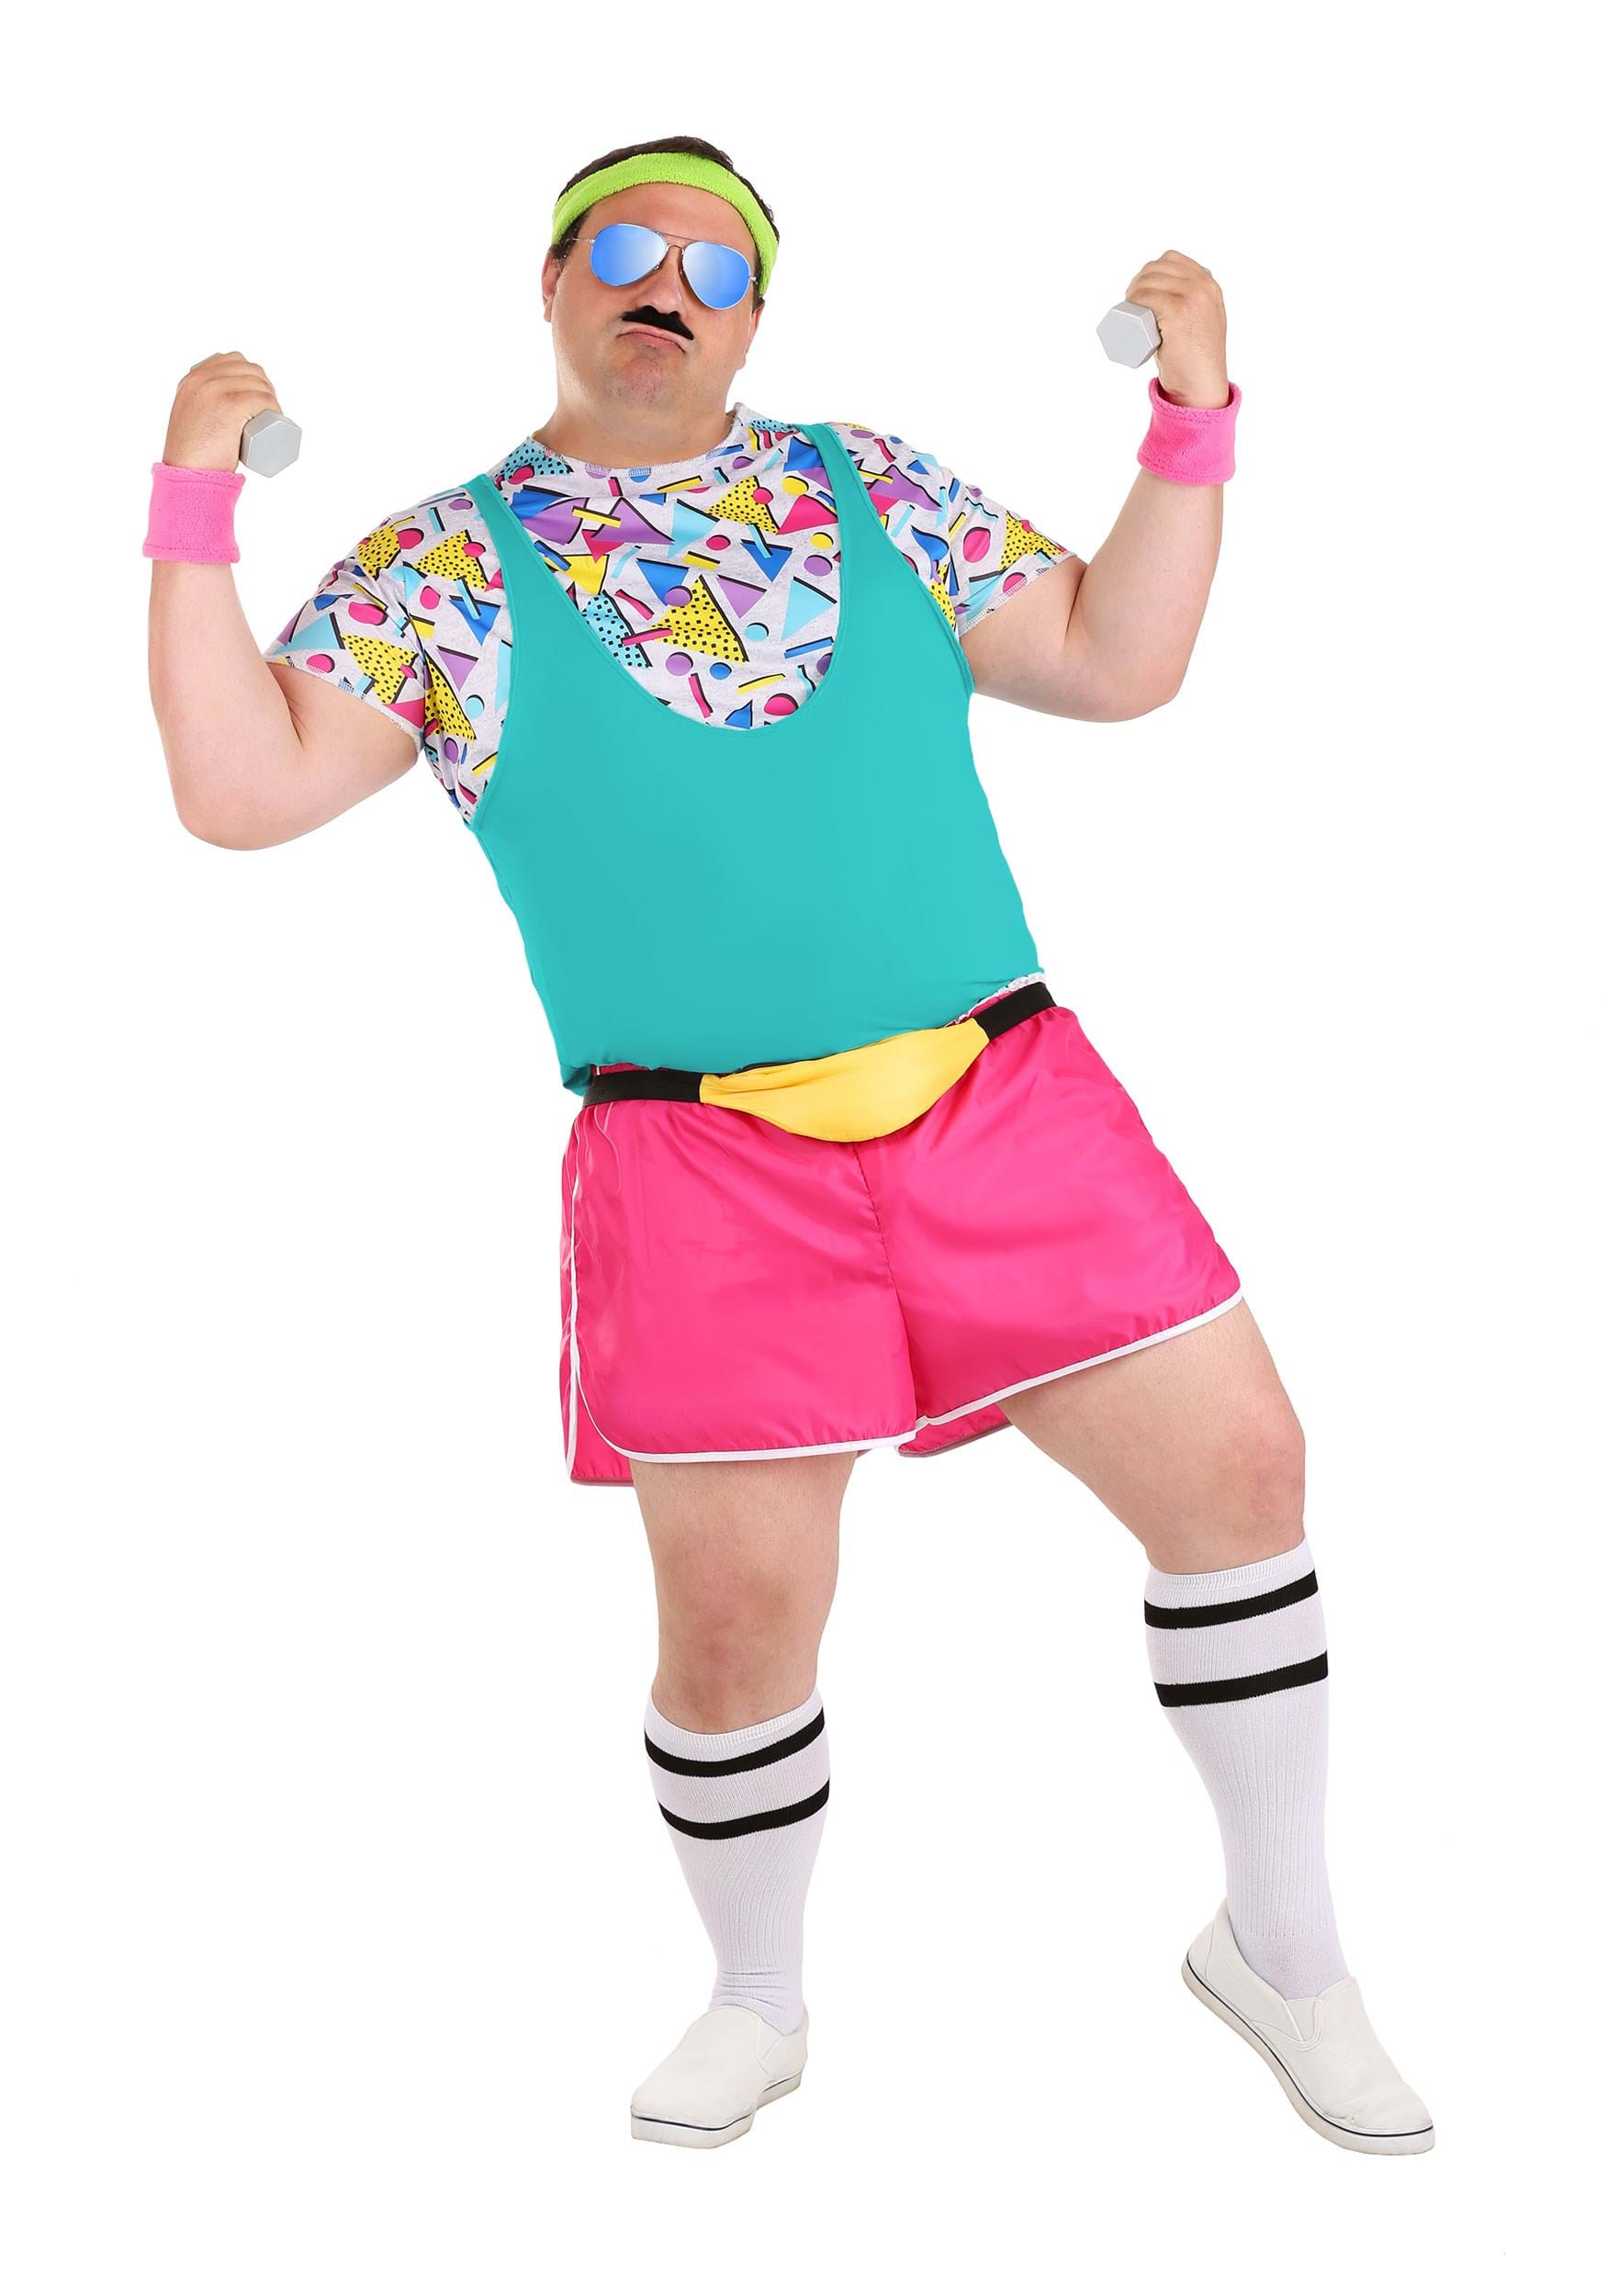 https://images.halloweencostumes.com/products/64380/1-1/mens-plus-size-work-it-out-80s-costume-main.jpg